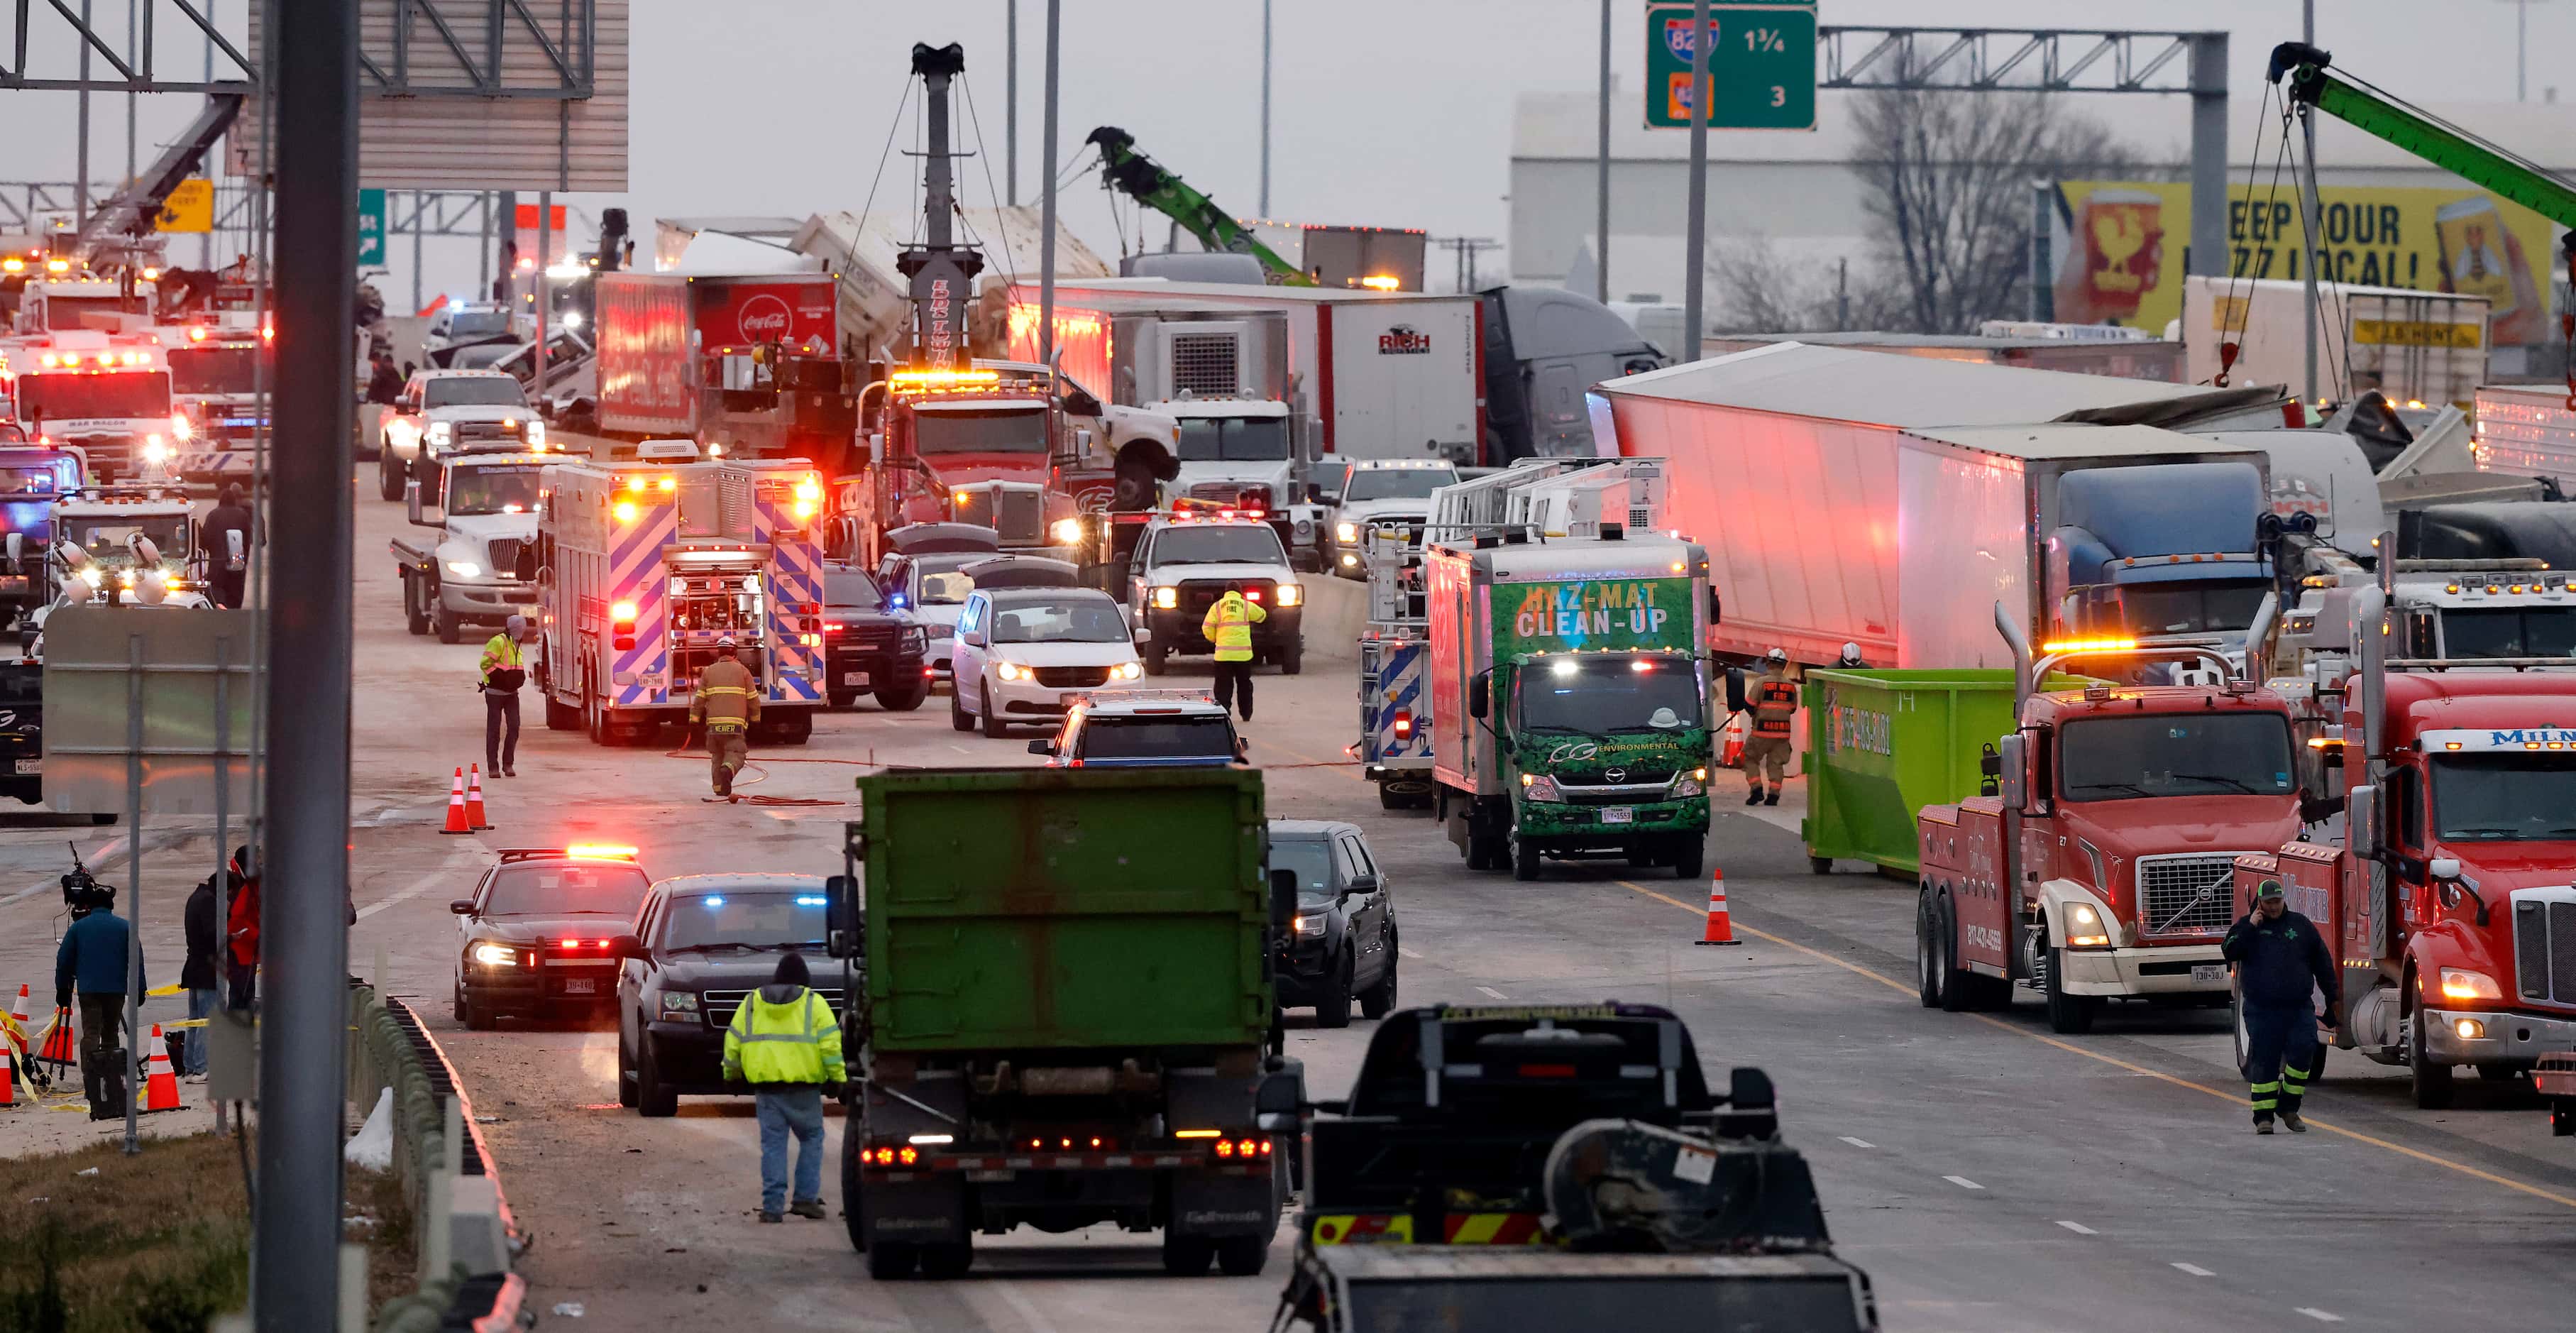 Cleanup continues on Interstate 35W near Northside Dr. in Fort Worth after a 133-car pile-up...